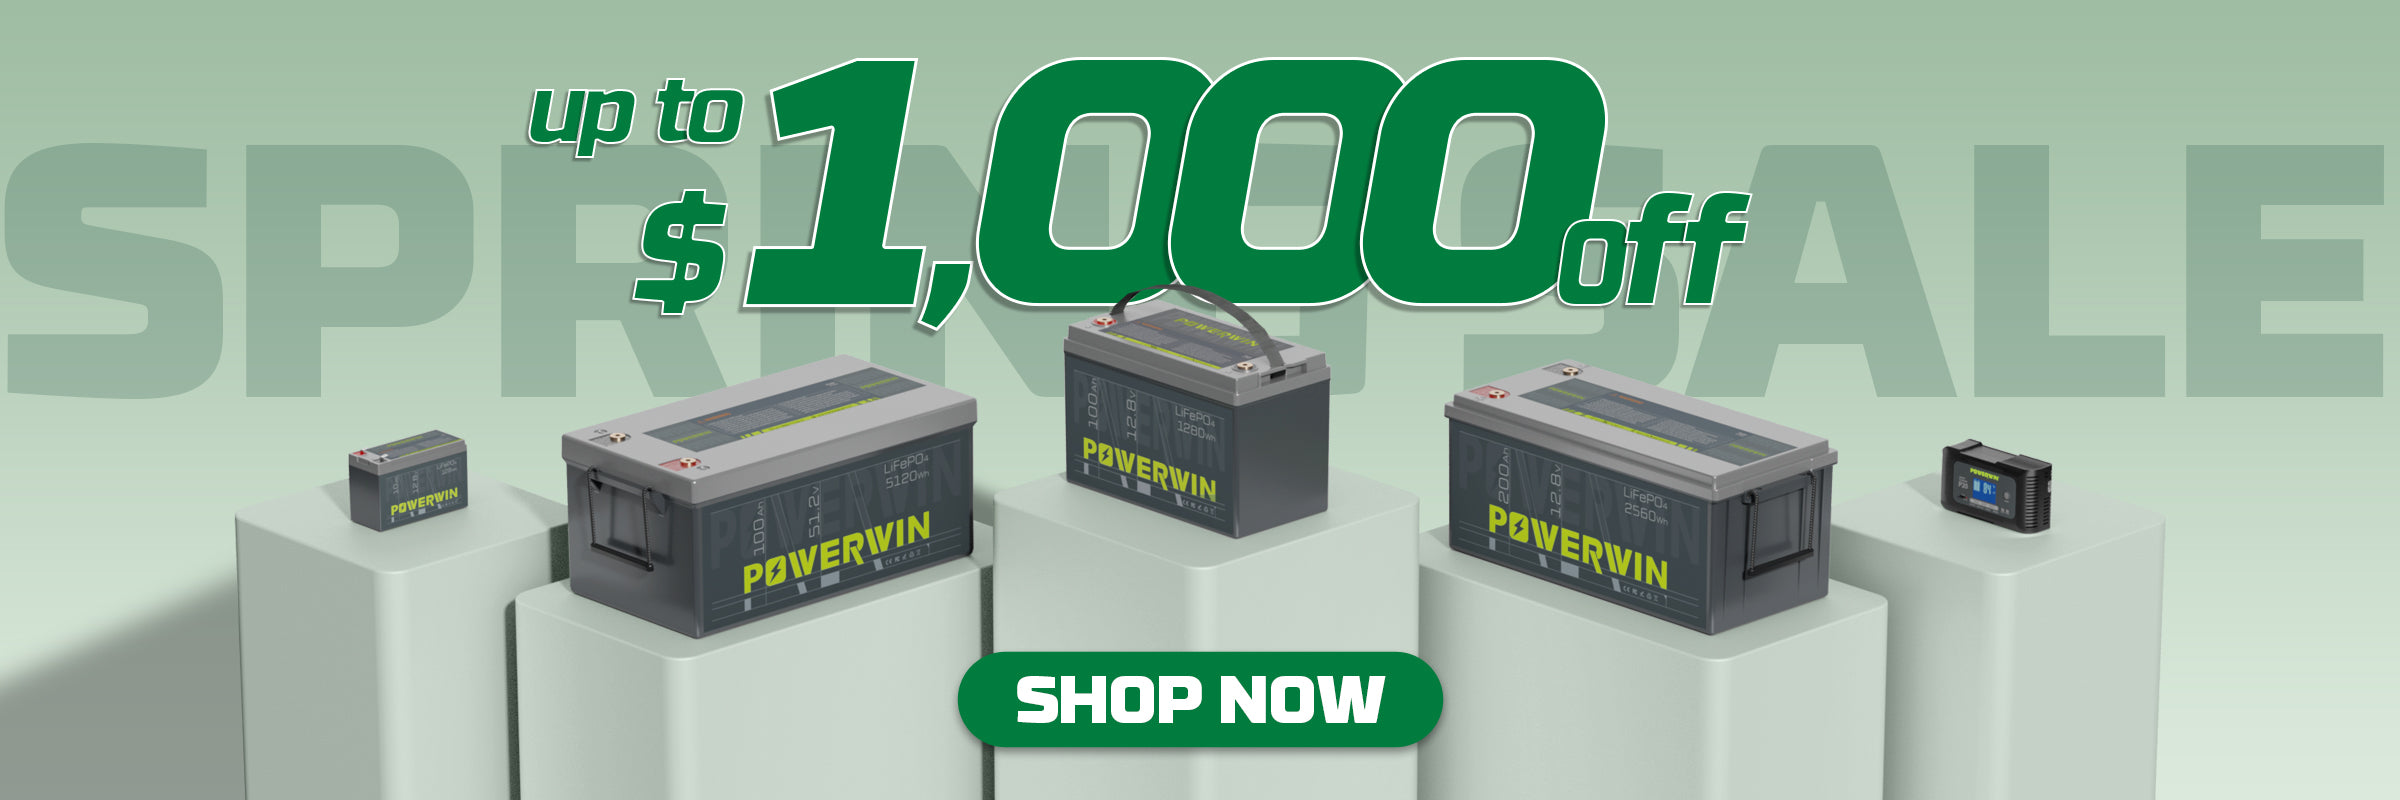 How to get the better deal  on powerwin spring sale ?